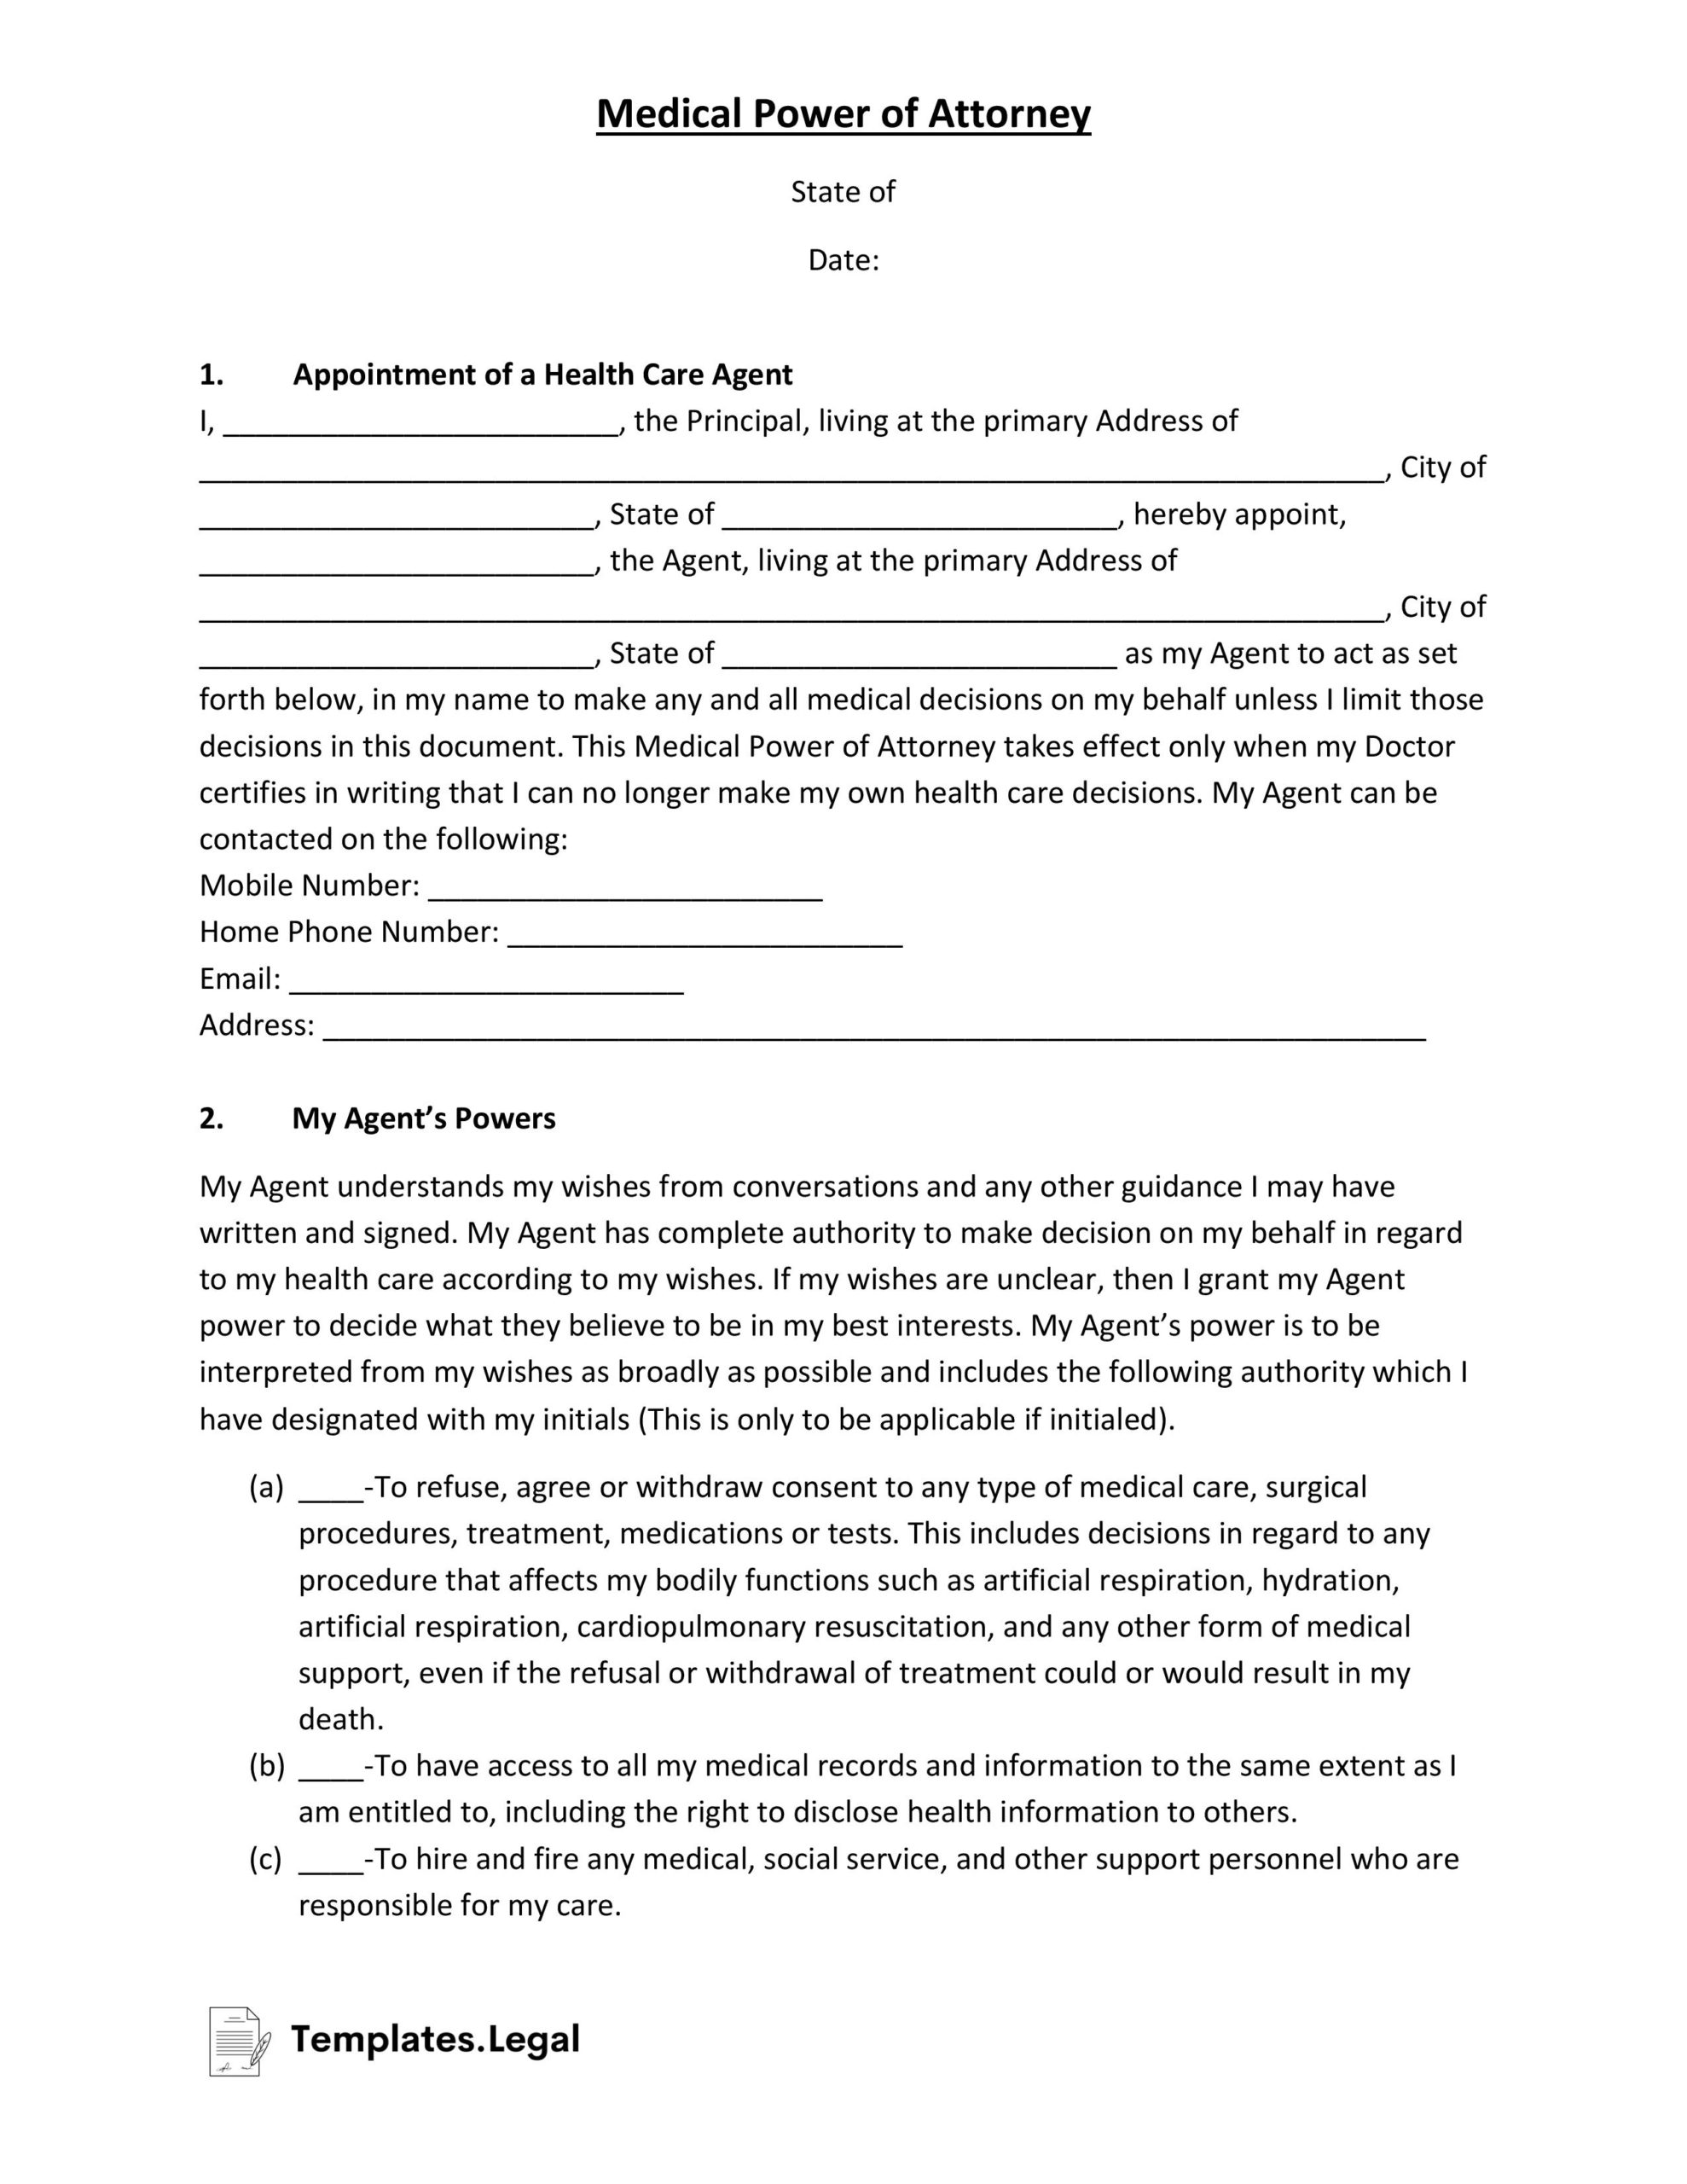 Medical Power of Attorney Templates (Free) [Word, PDF & ODT]